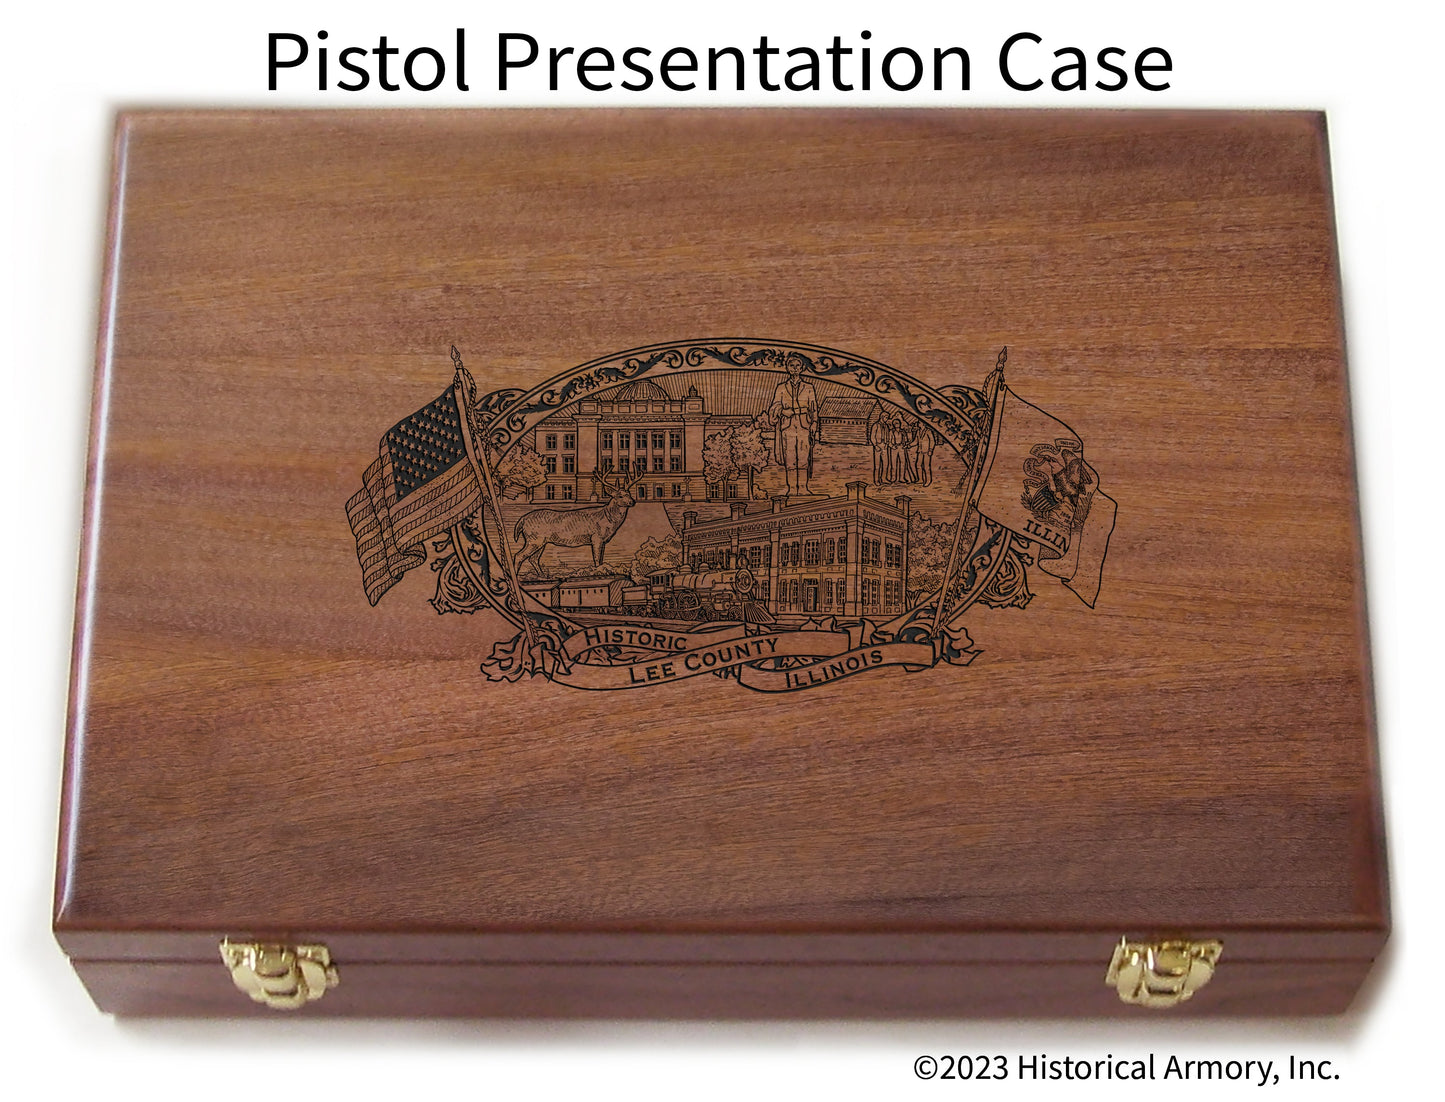 Lee County Illinois Engraved .45 Auto Ruger 1911 Presentation Case